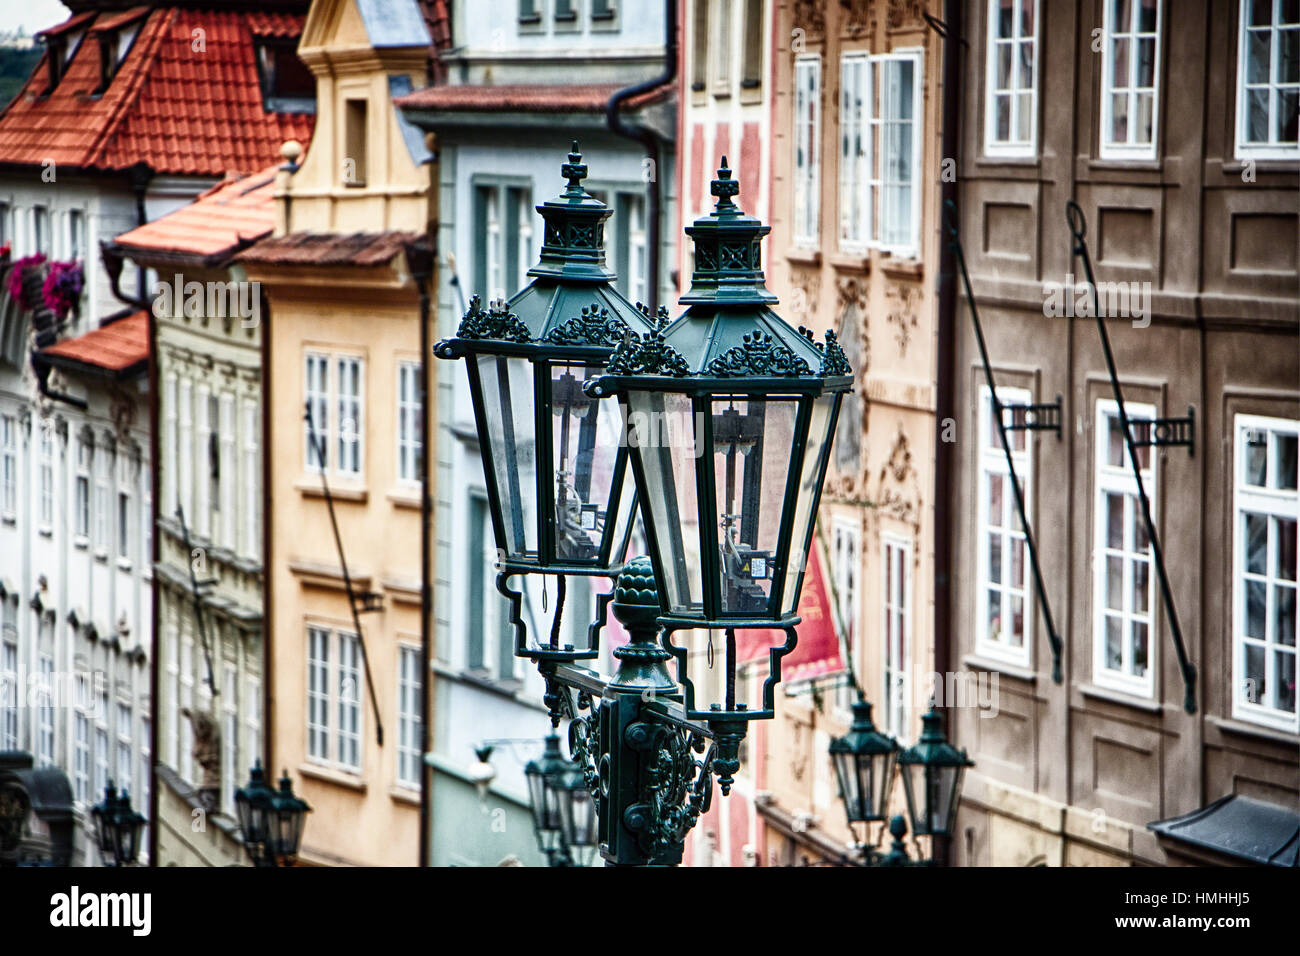 Close Up View of Classic Gas Lamps on a Street, Old Town, Prague, Czech Republic Stock Photo